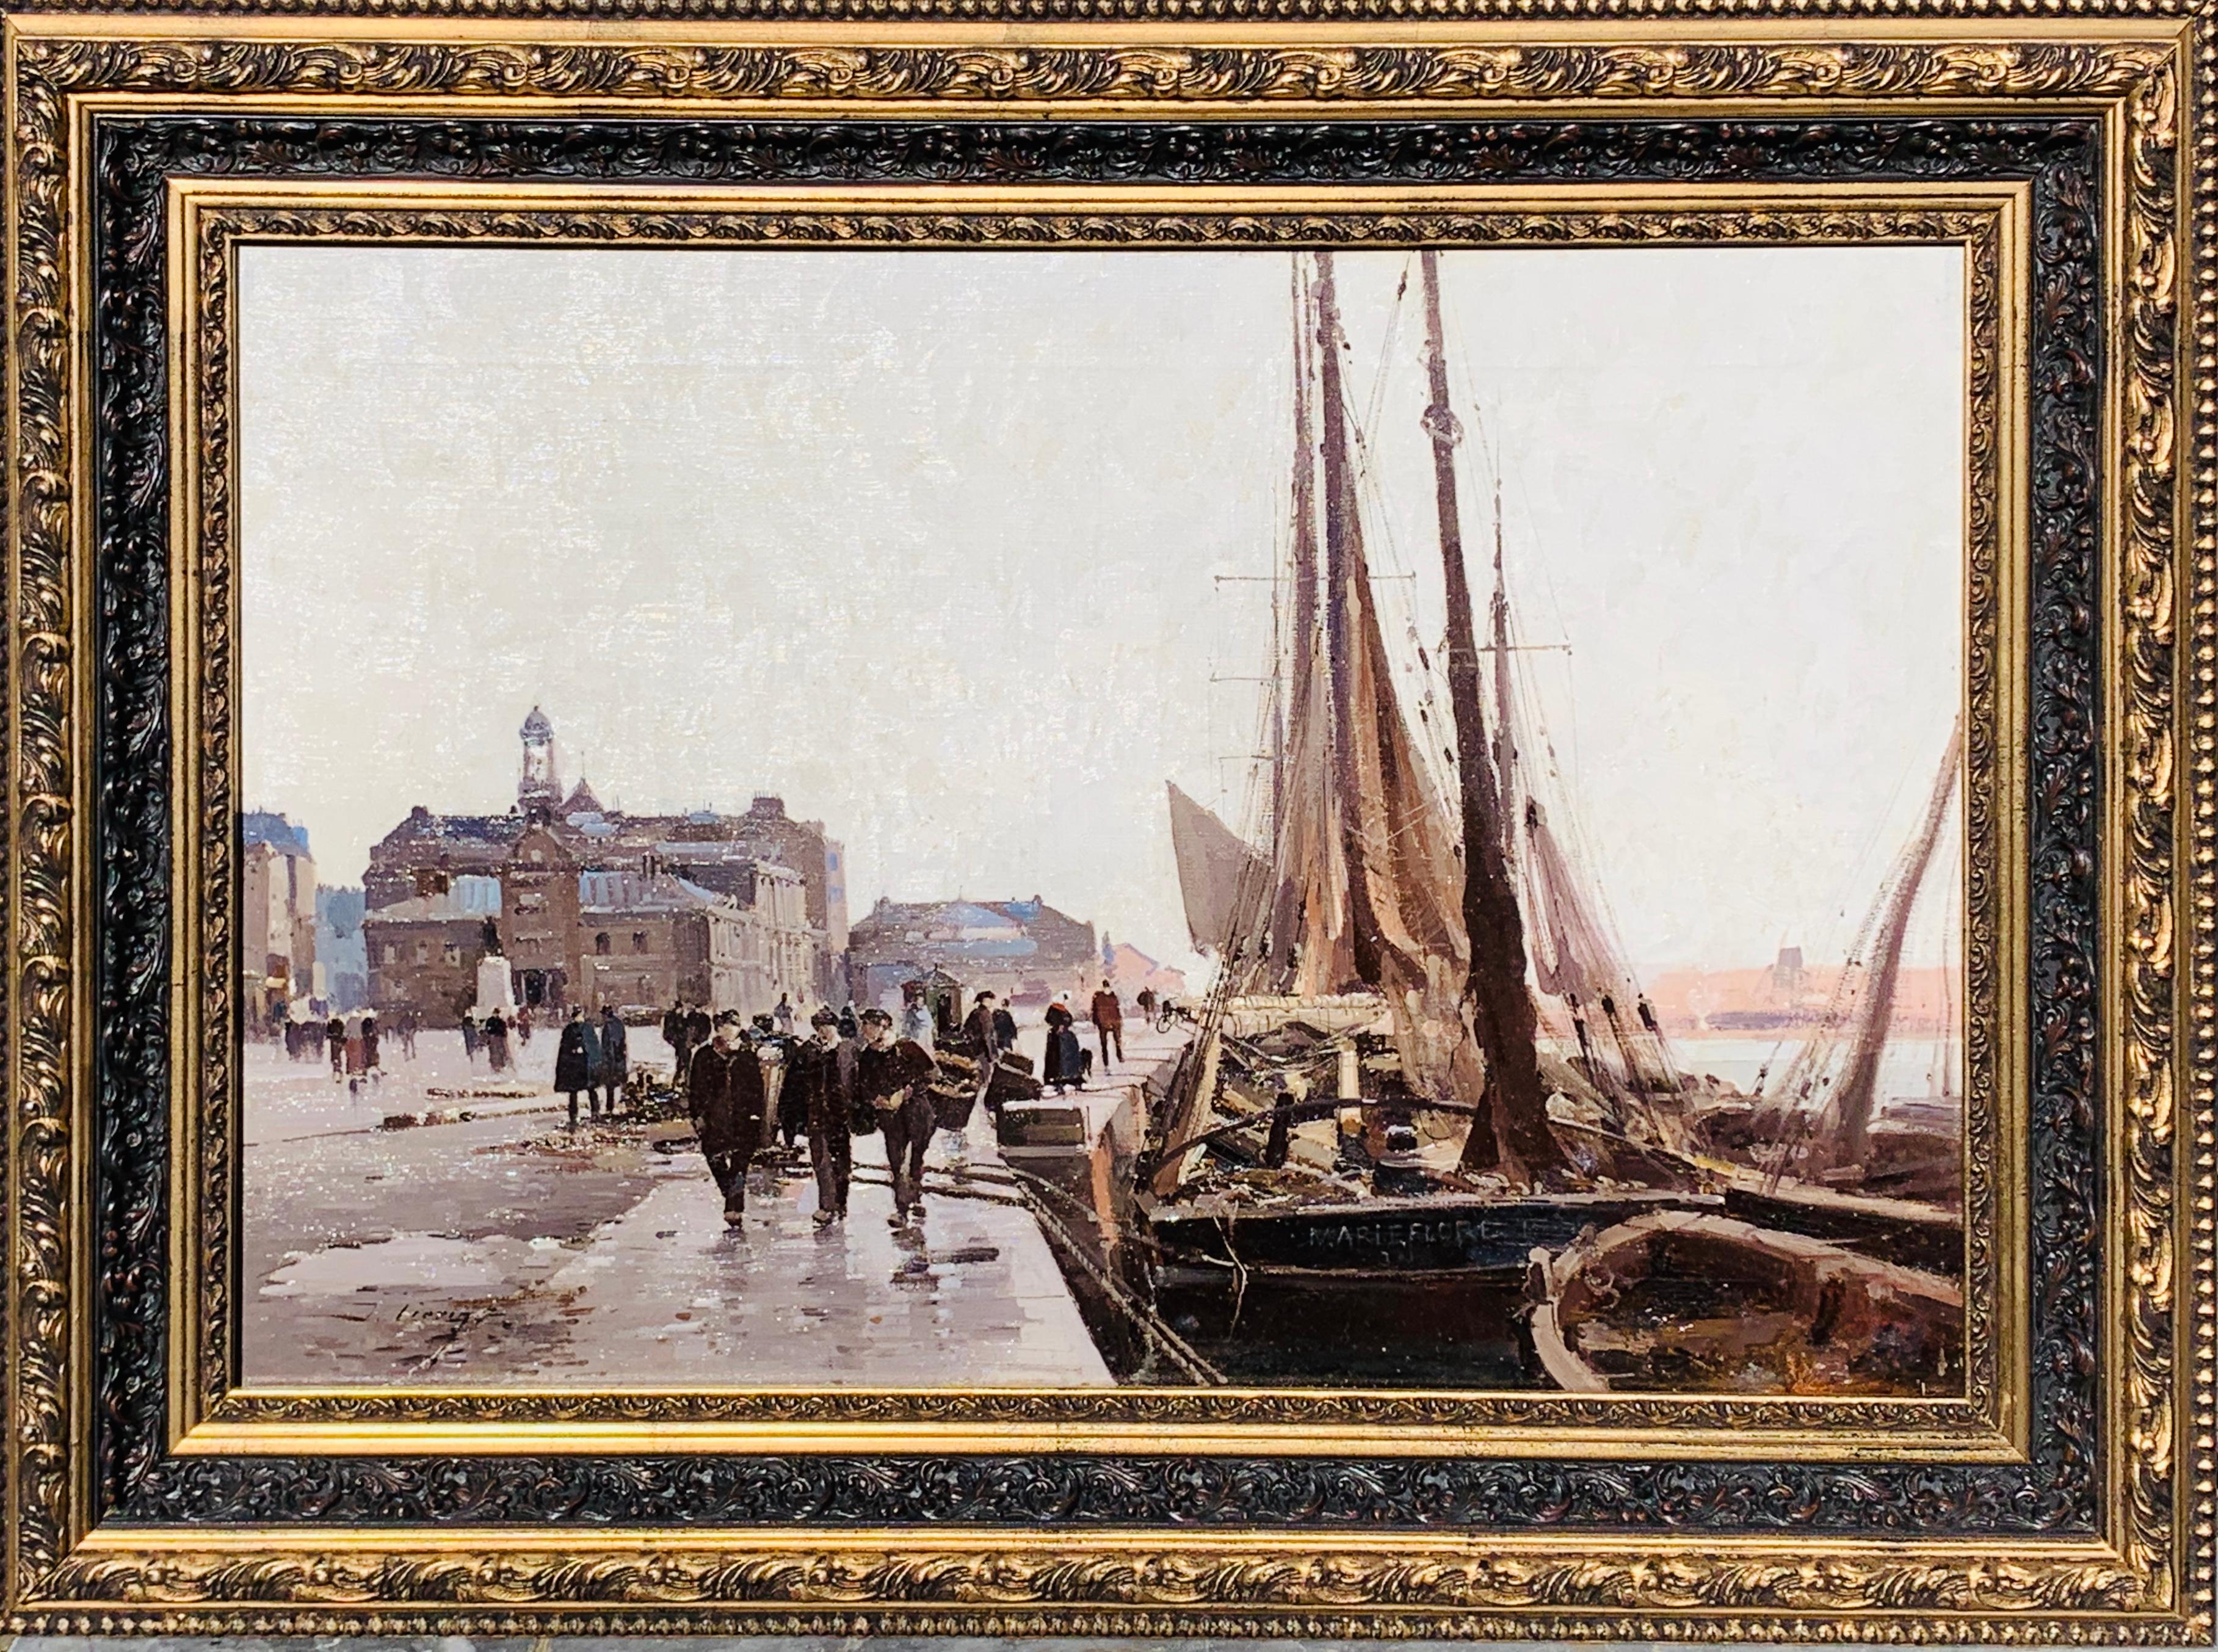 Eugene Galien-Laloue Figurative Painting - 19th century French painting - The docks in Bordeaux